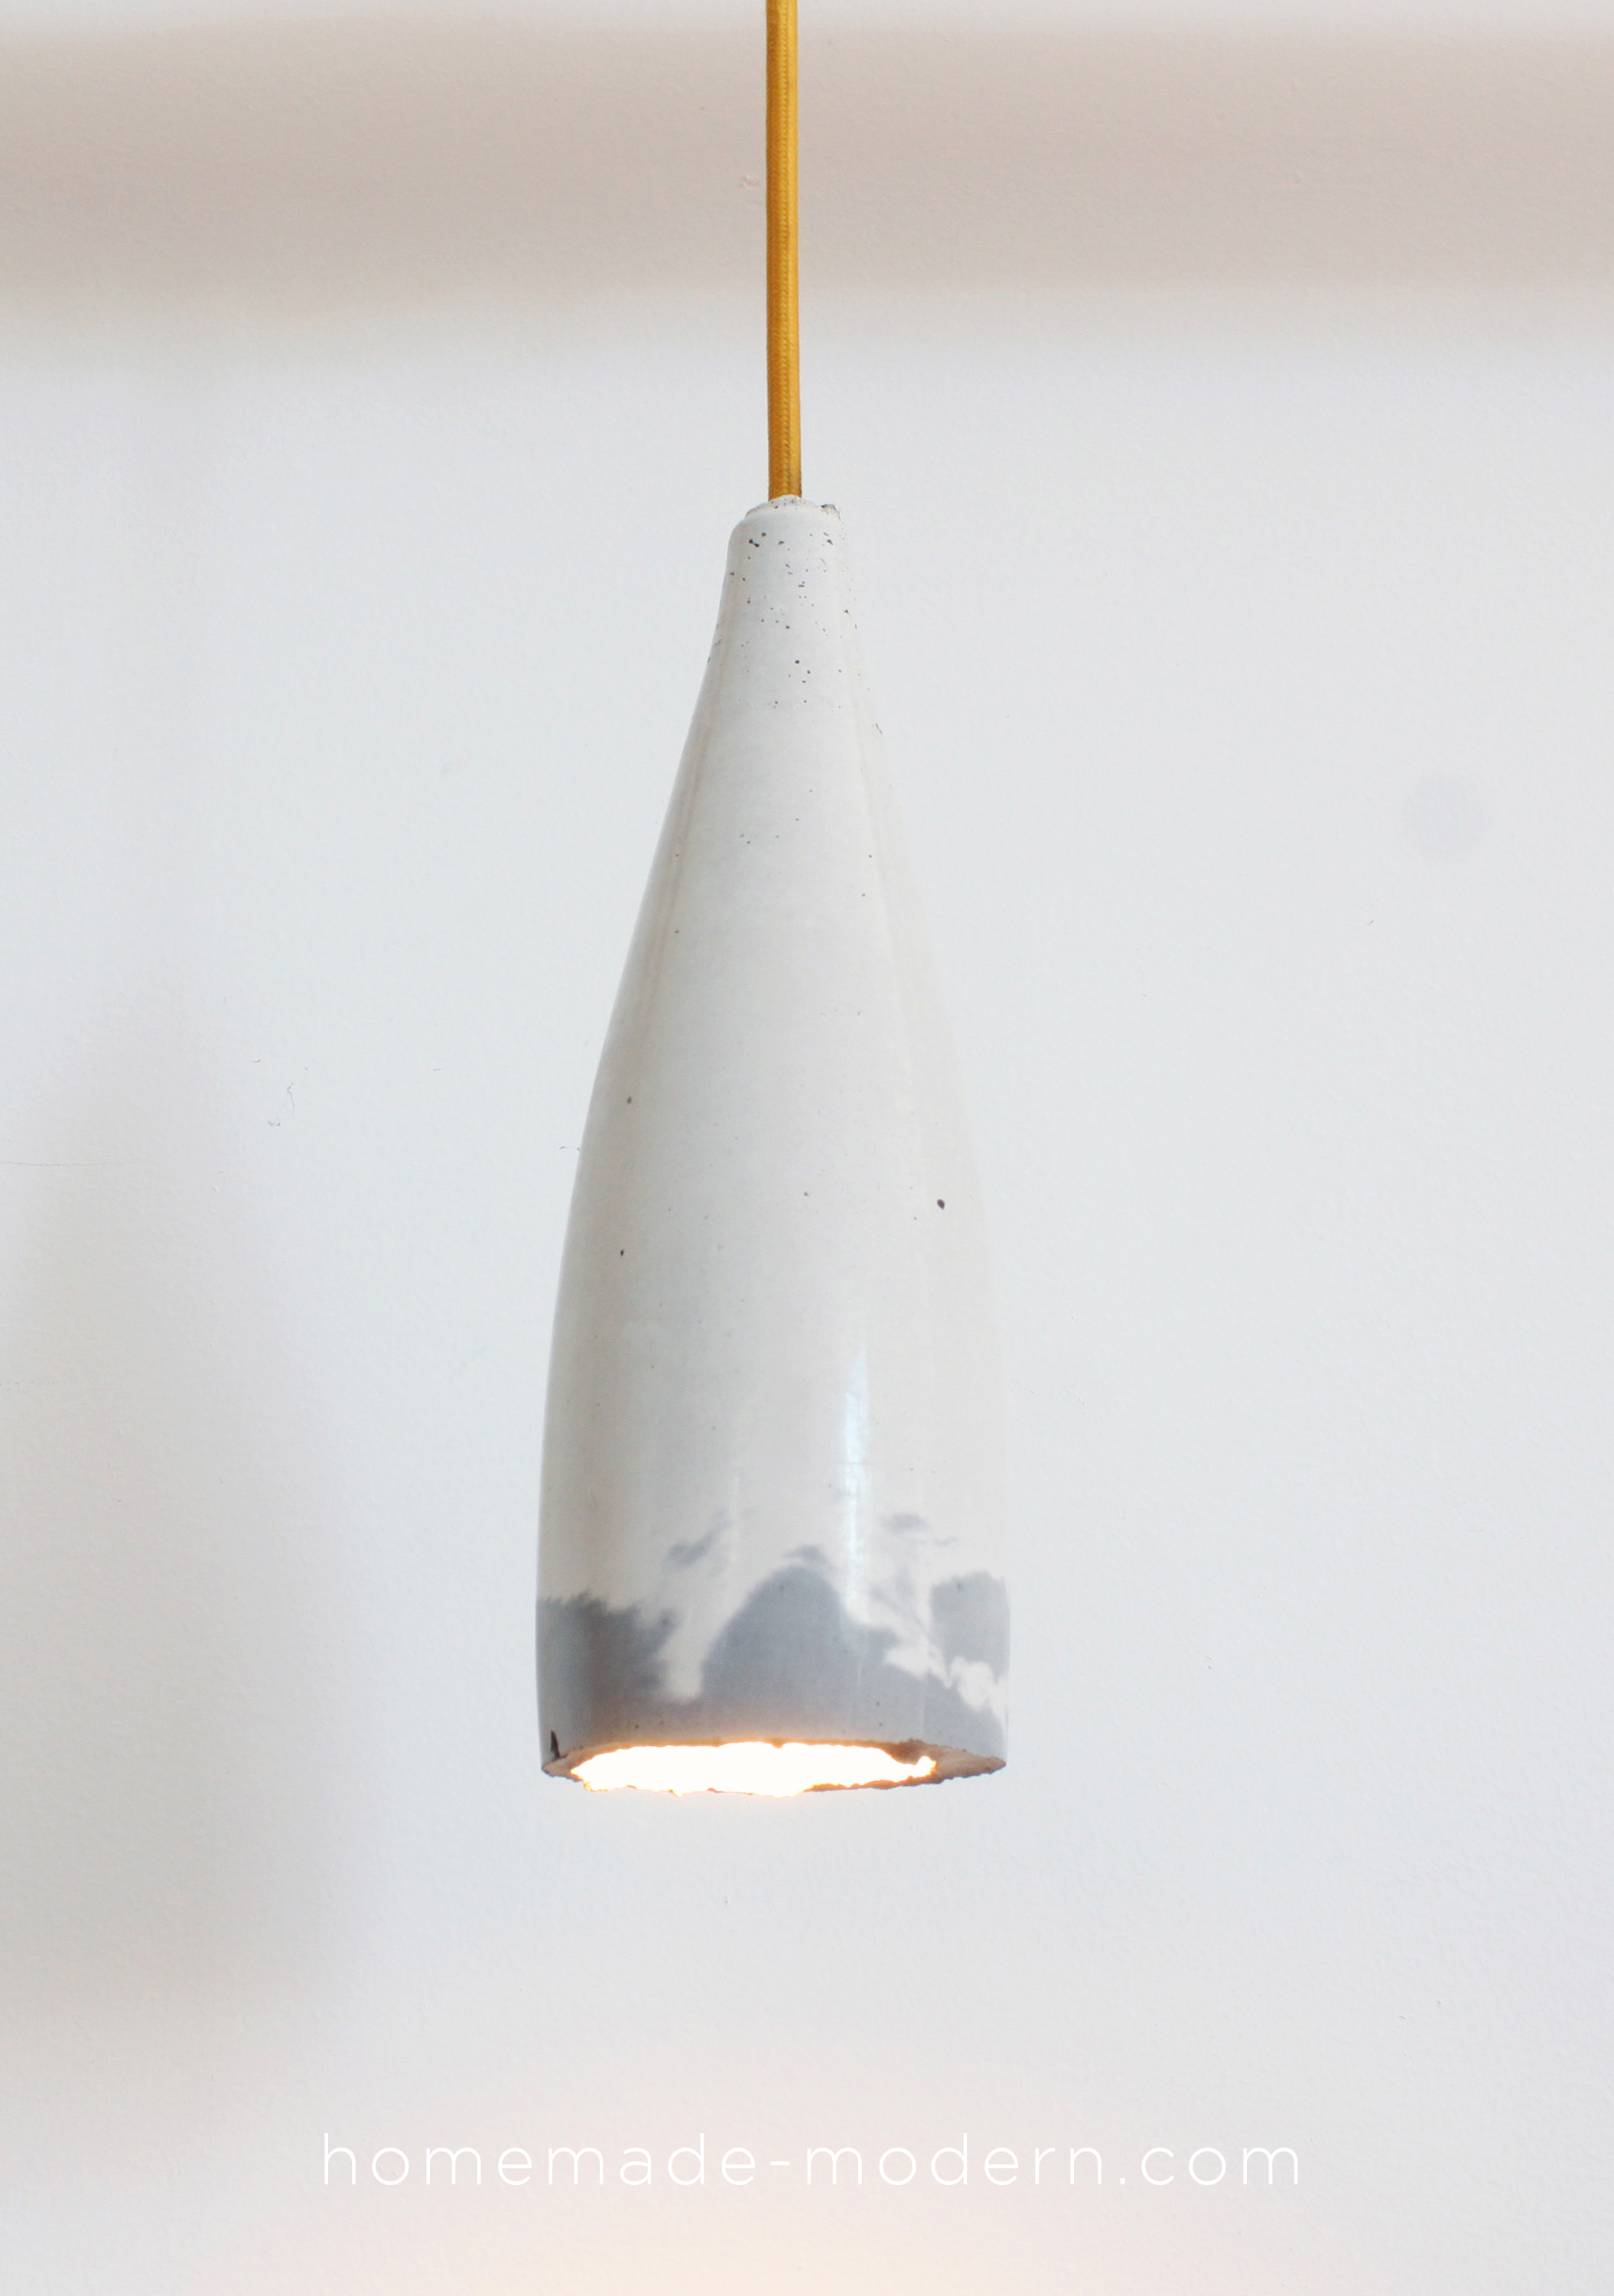 These DIY concrete lamps are easy and affordable to make. For more information go to HomeMade-Modern.com